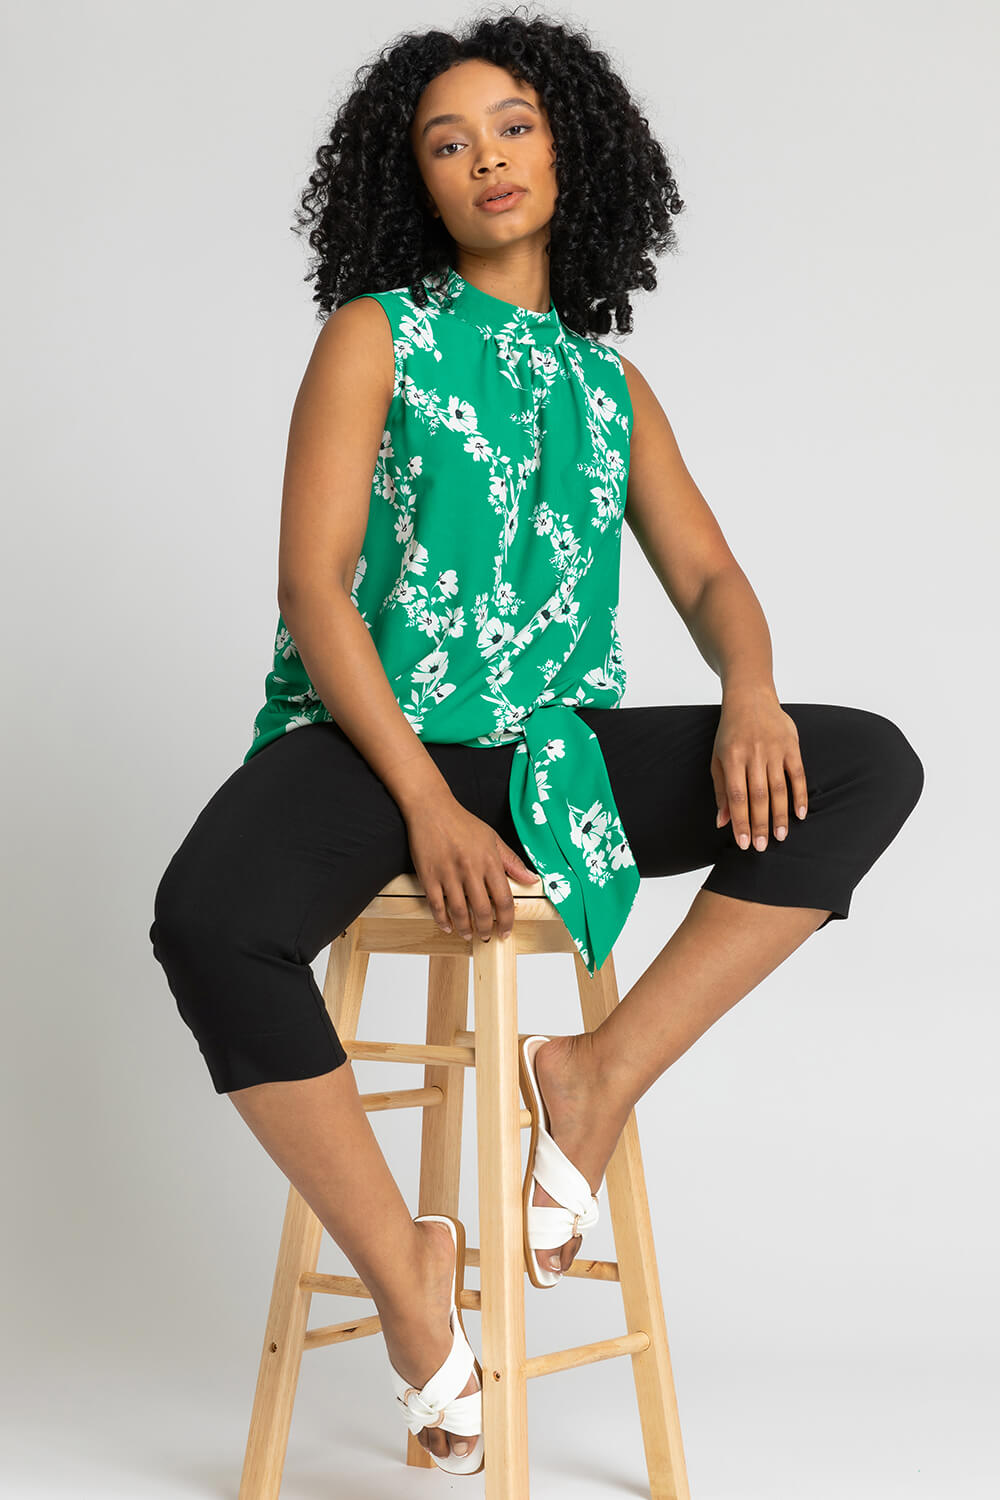 Green Petite Floral Print High Neck Tie Top, Image 5 of 5